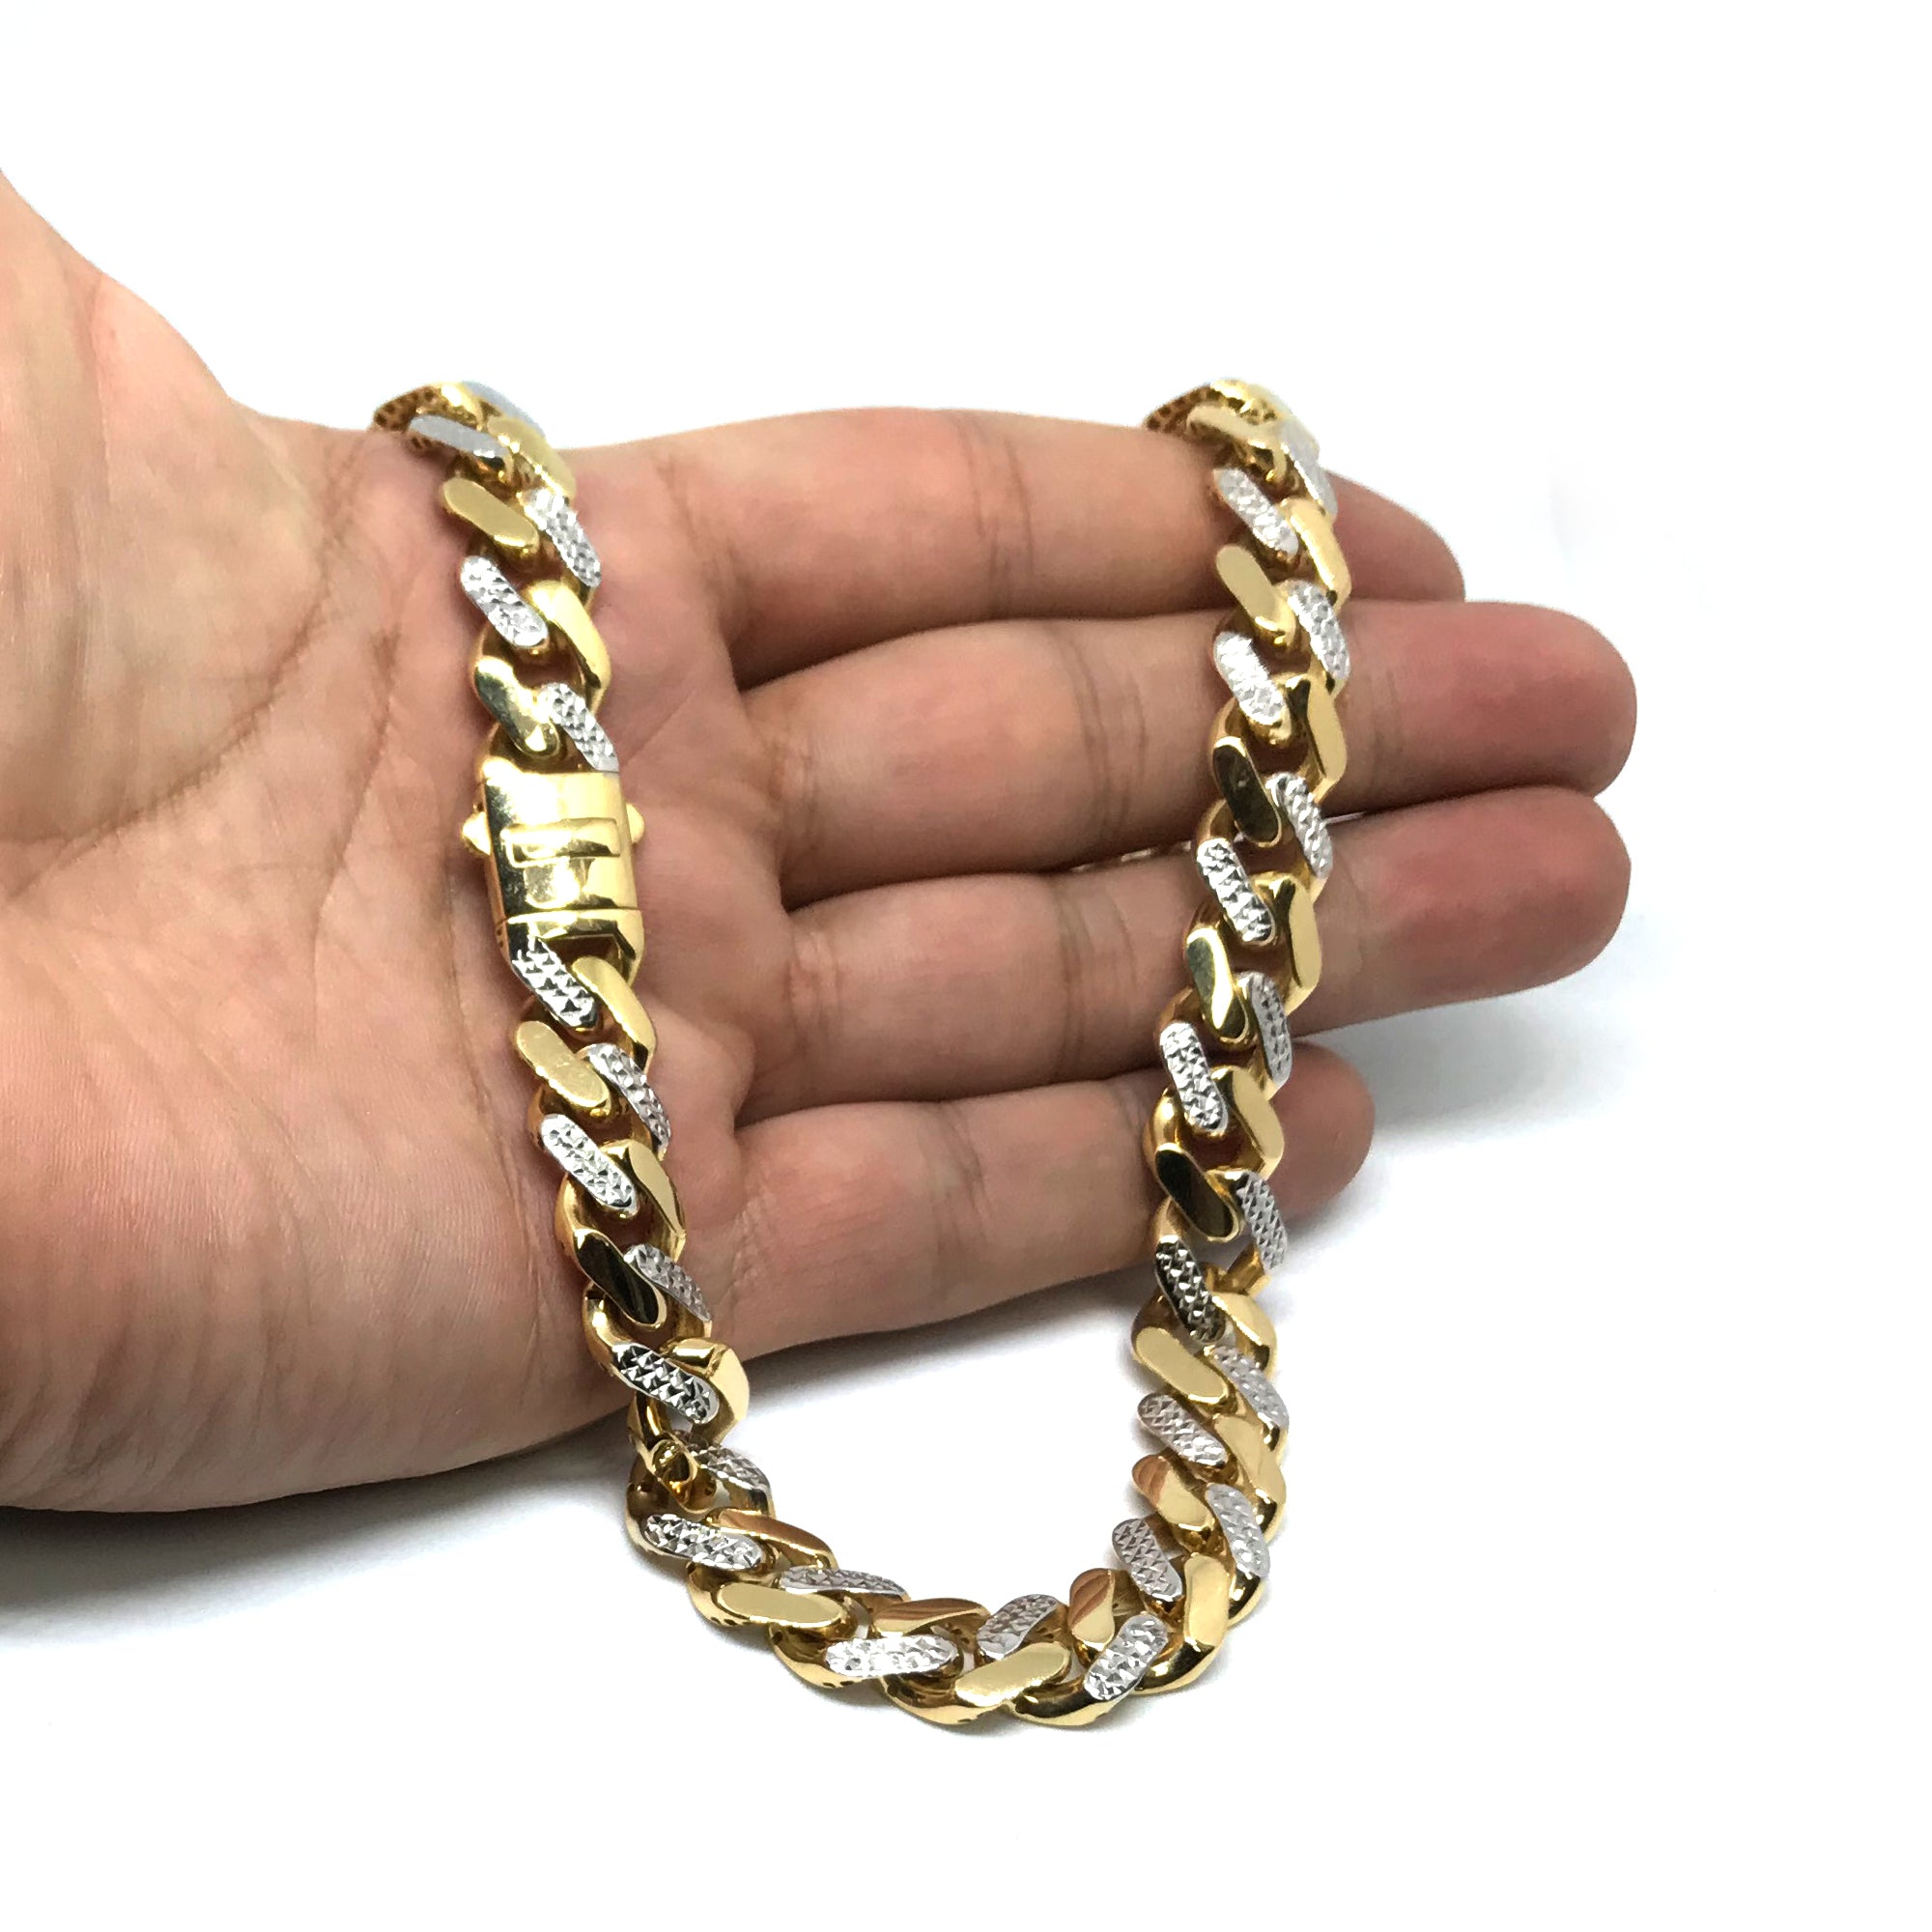 14k Yellow And White Gold Miami Cuban Pave Link Chain Necklace, Width 11.3mm, 24" fine designer jewelry for men and women